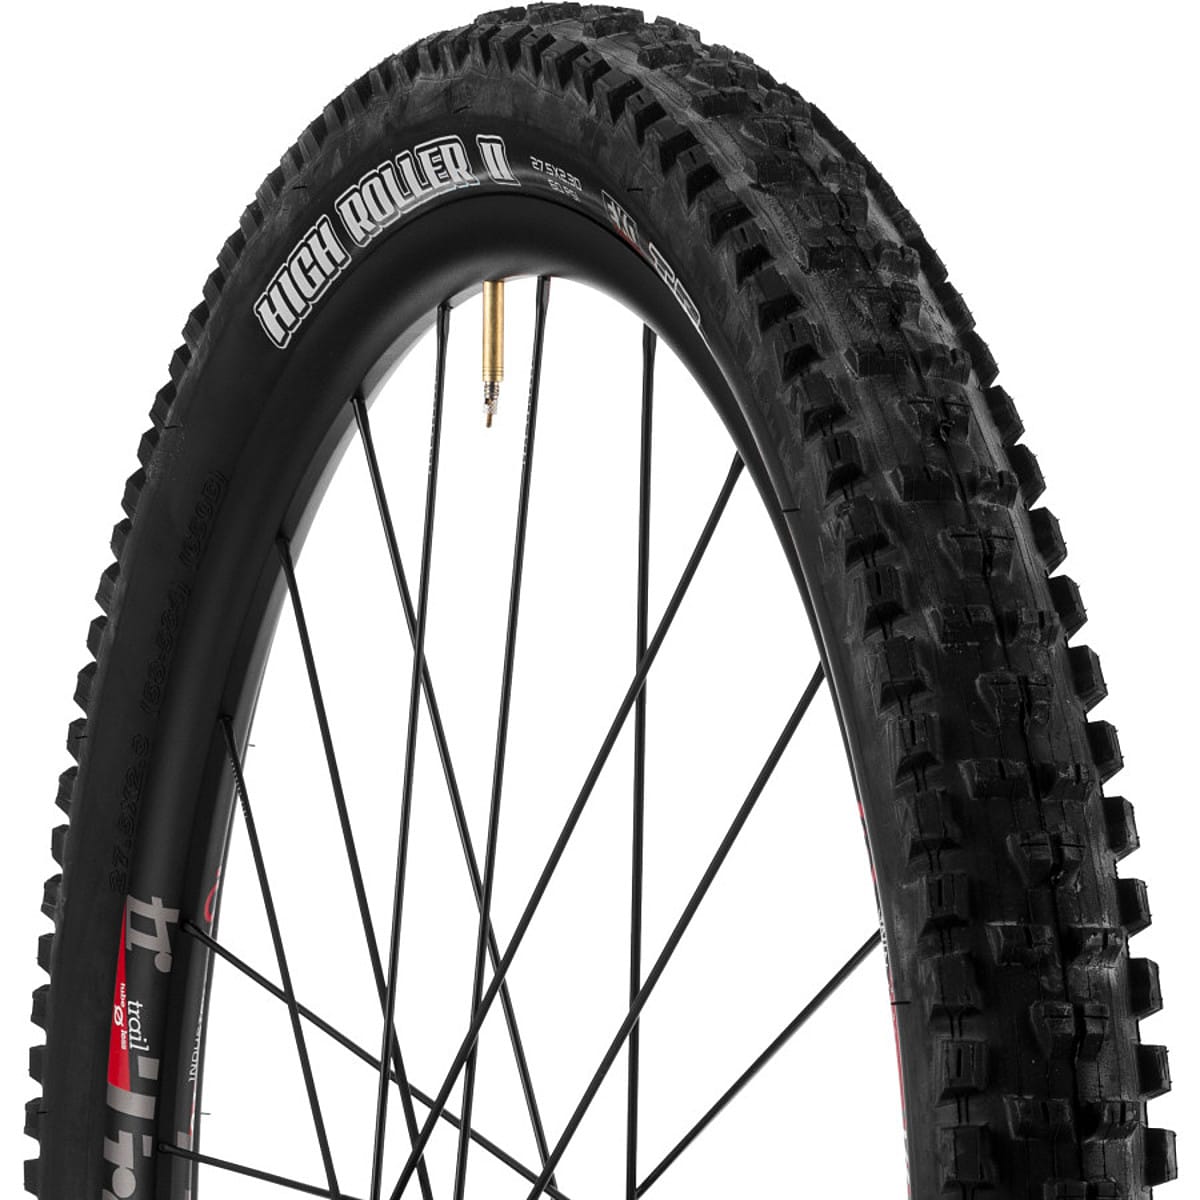 Maxxis High Roller II EXO Tubeless Ready - 27.5in Tire